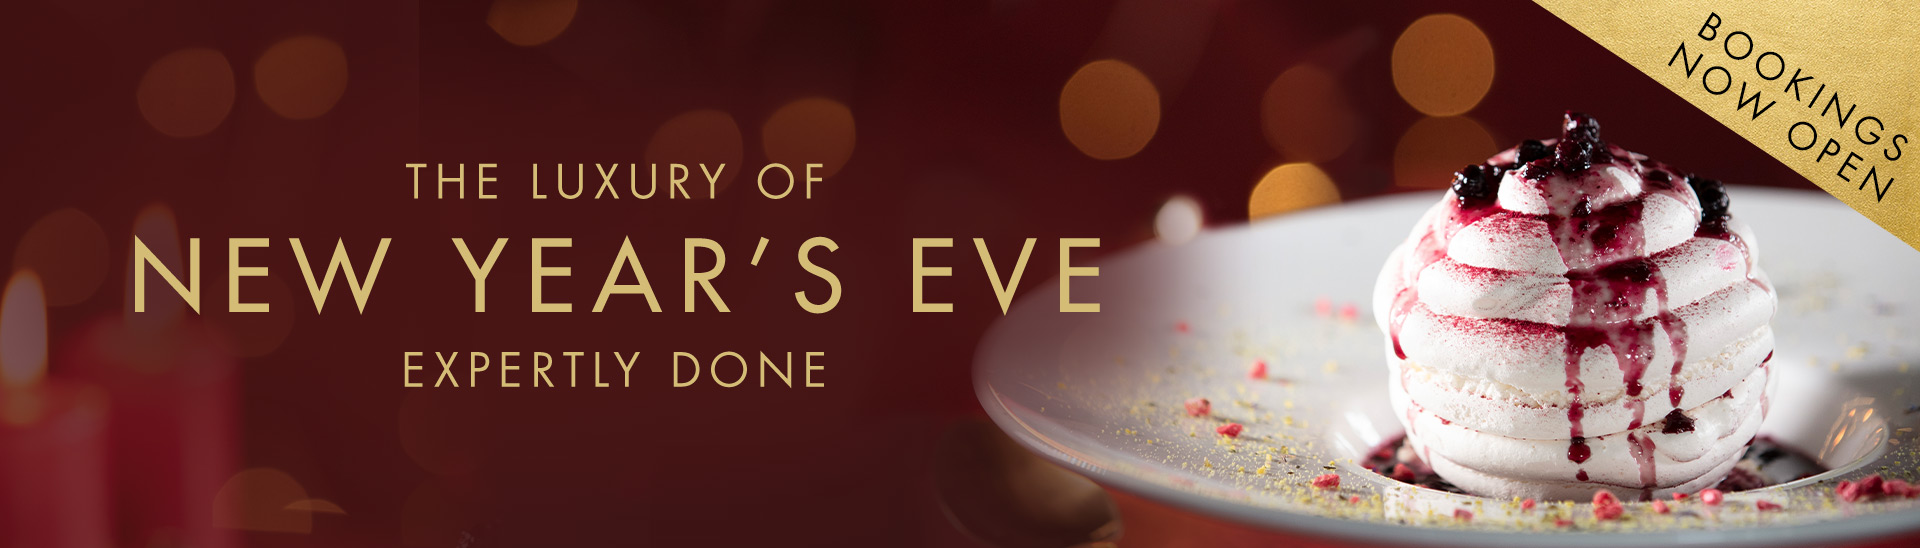 New Year’s Eve Menu at Miller & Carter Beaconsfield • Book Now